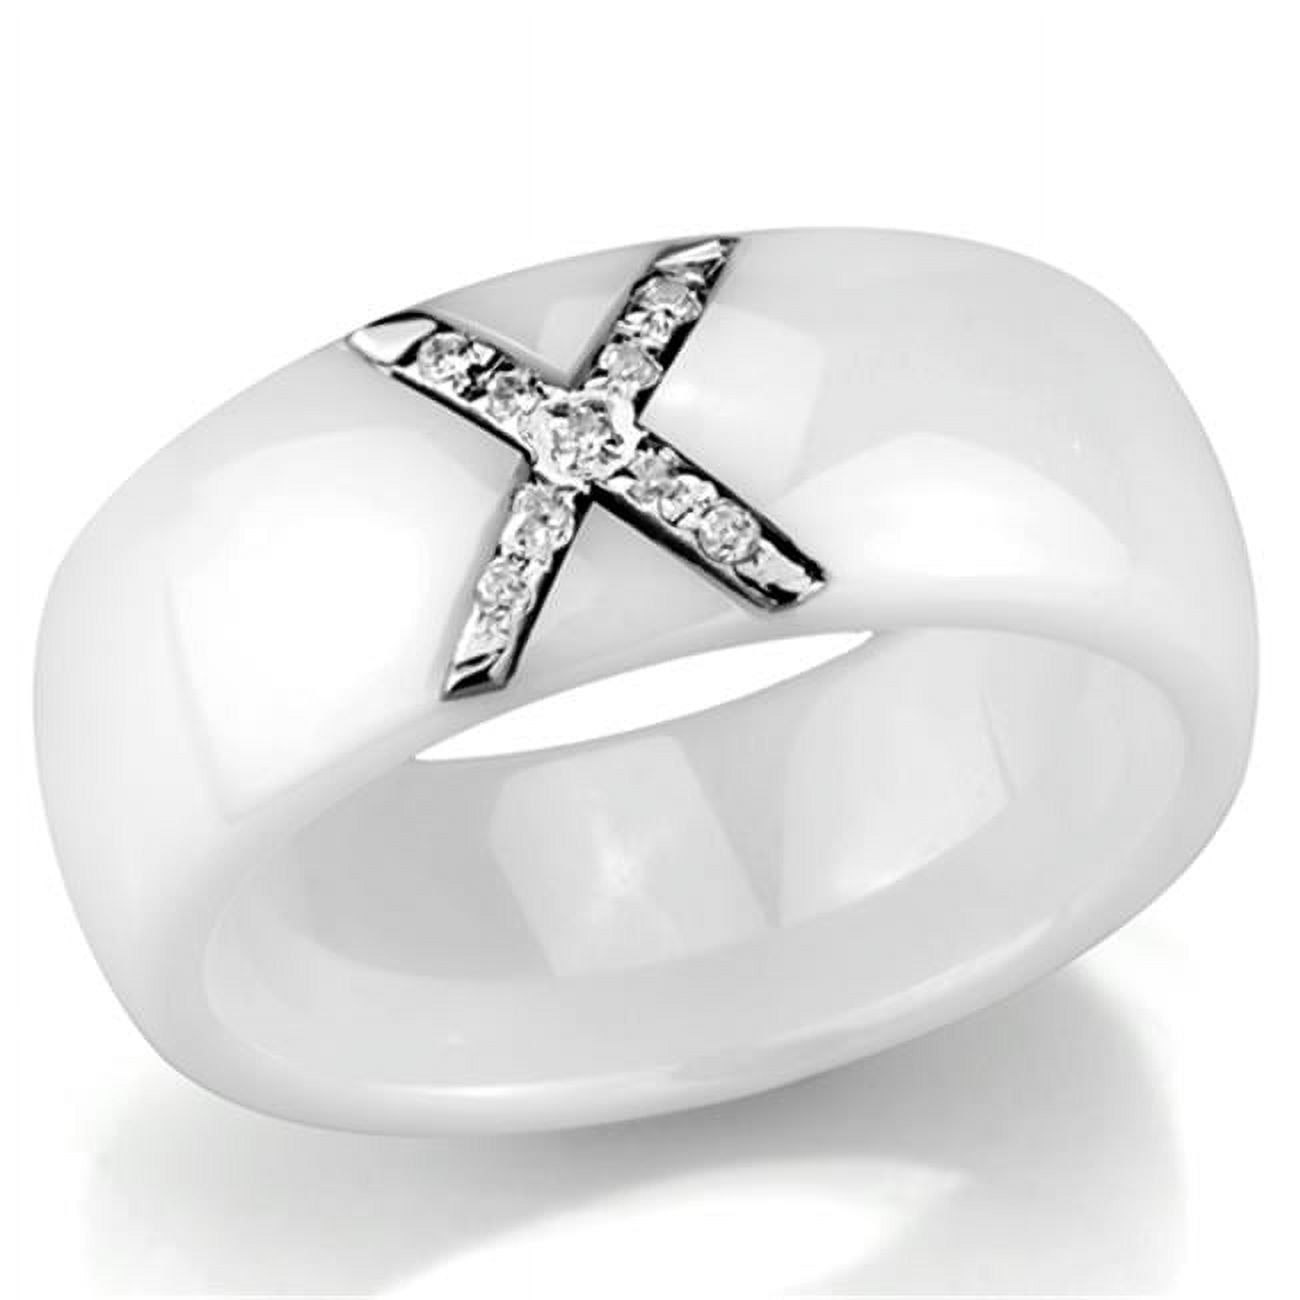 Picture of Alamode 3W948-7 Women High Polished Stainless Steel Ring with Ceramic in White - Size 7